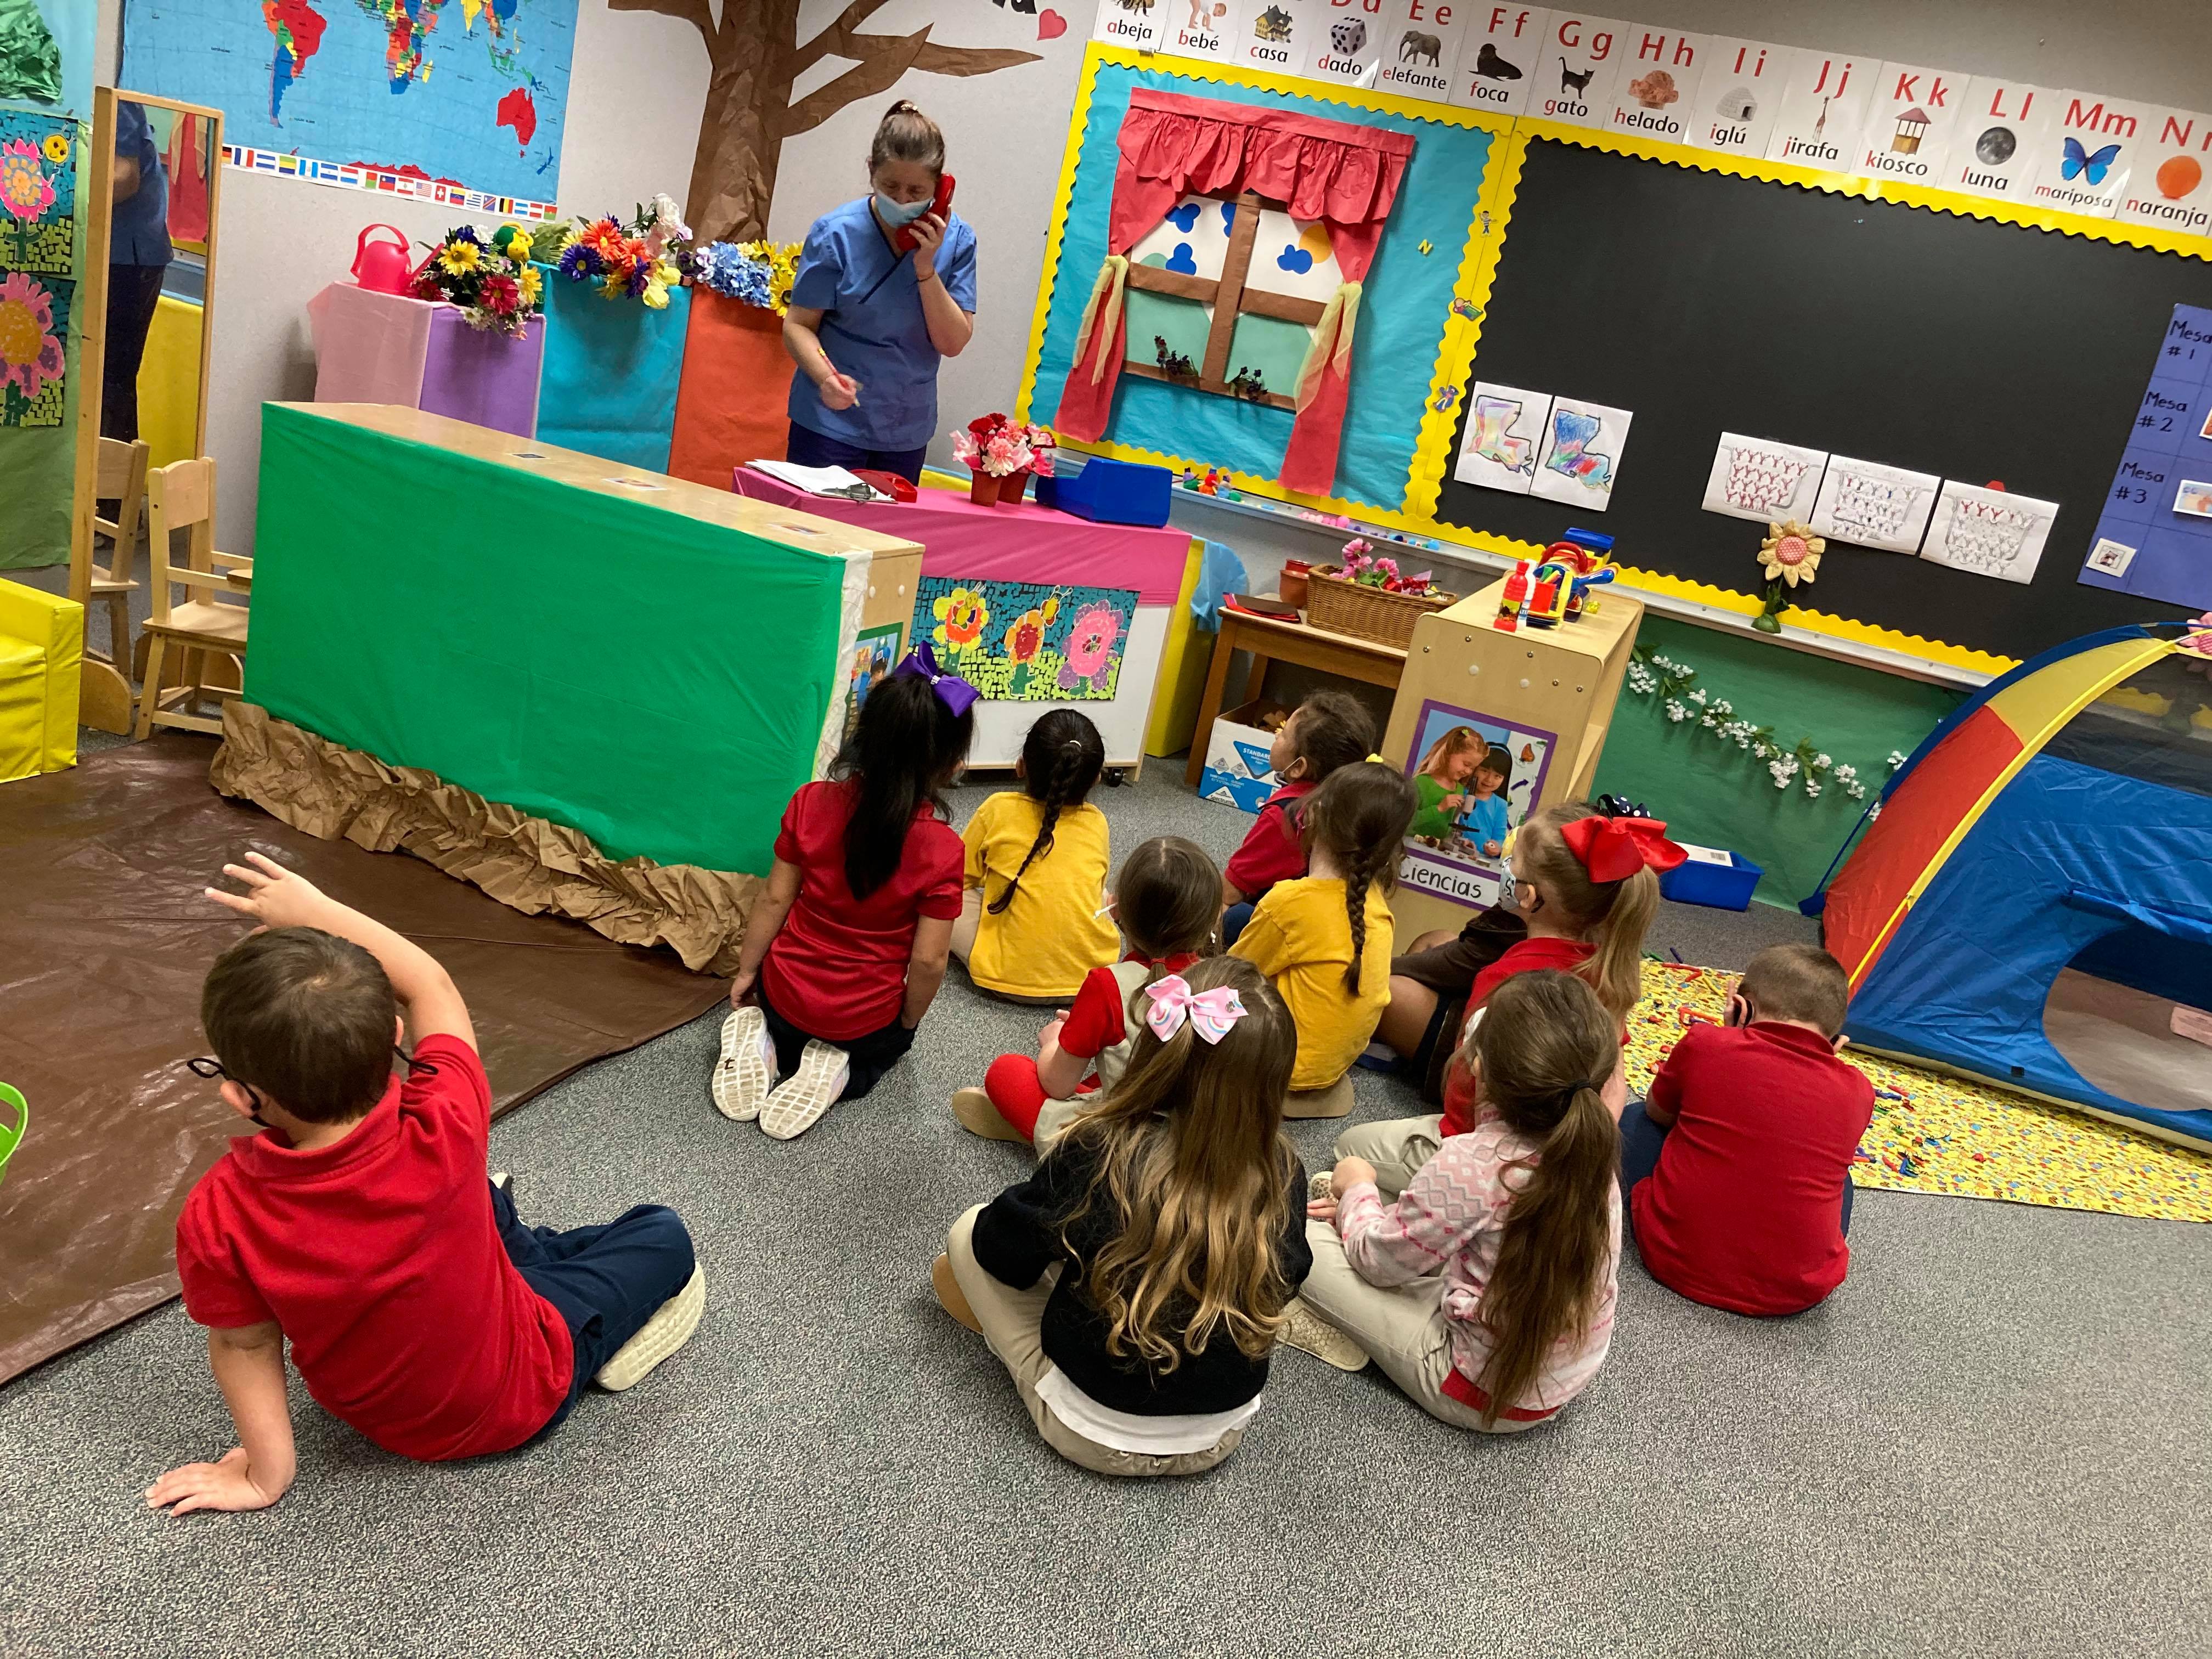 Julia Lopez, a pre-K Spanish immersion teacher at Charles M. Burke Elementary, says this year of teaching has been an emotional and special one. Here, she answers a play phone before her 4-year-old students.